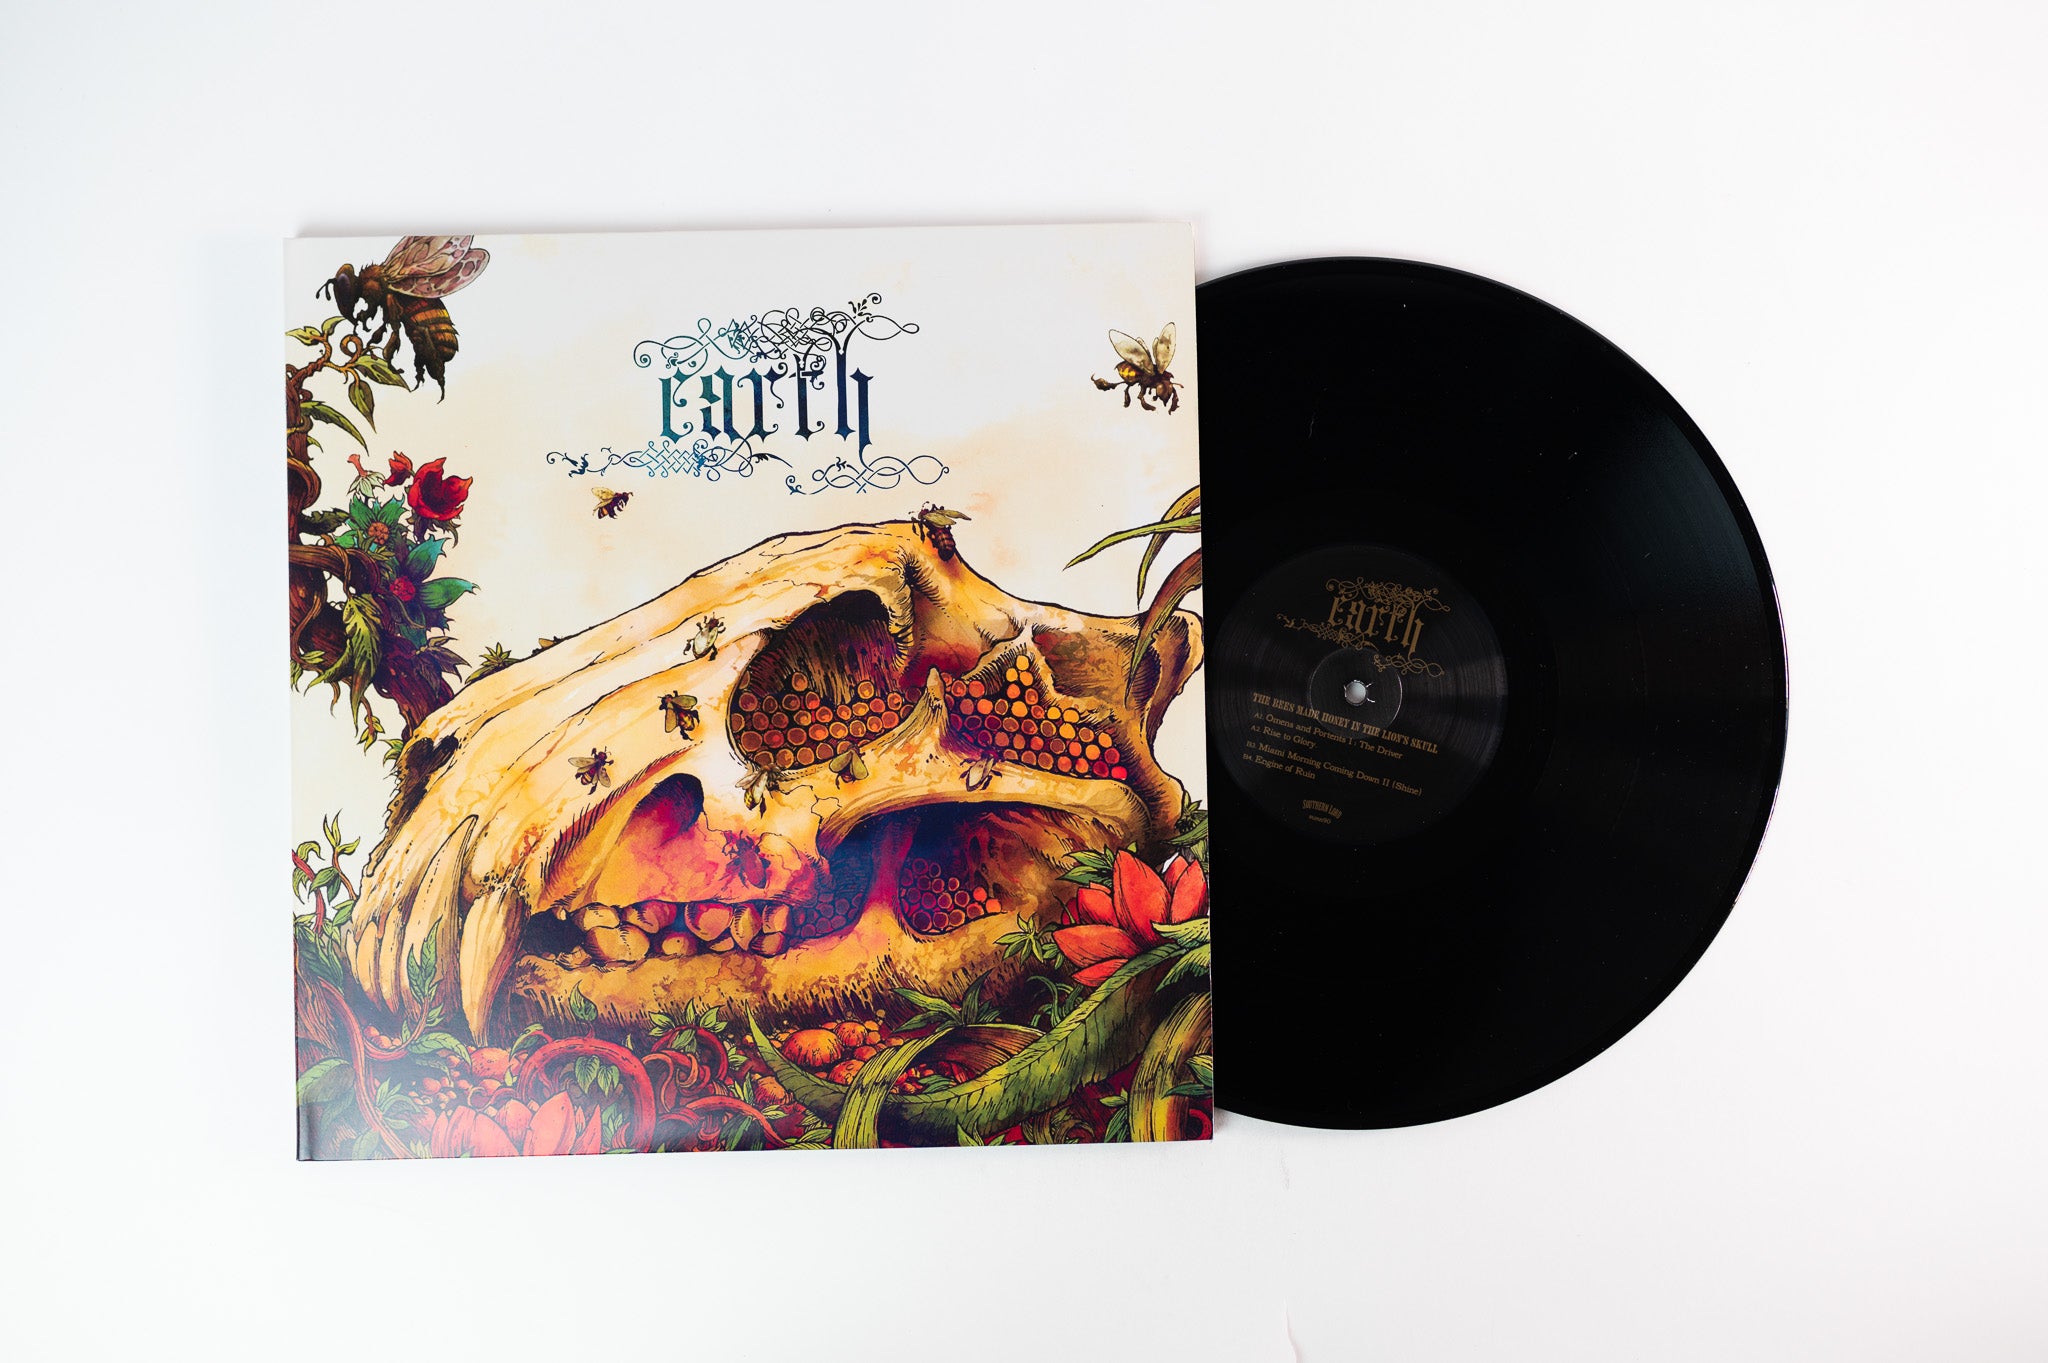 Earth - The Bees Made Honey In The Lion's Skull on Southern Lord Black Vinyl Reissue